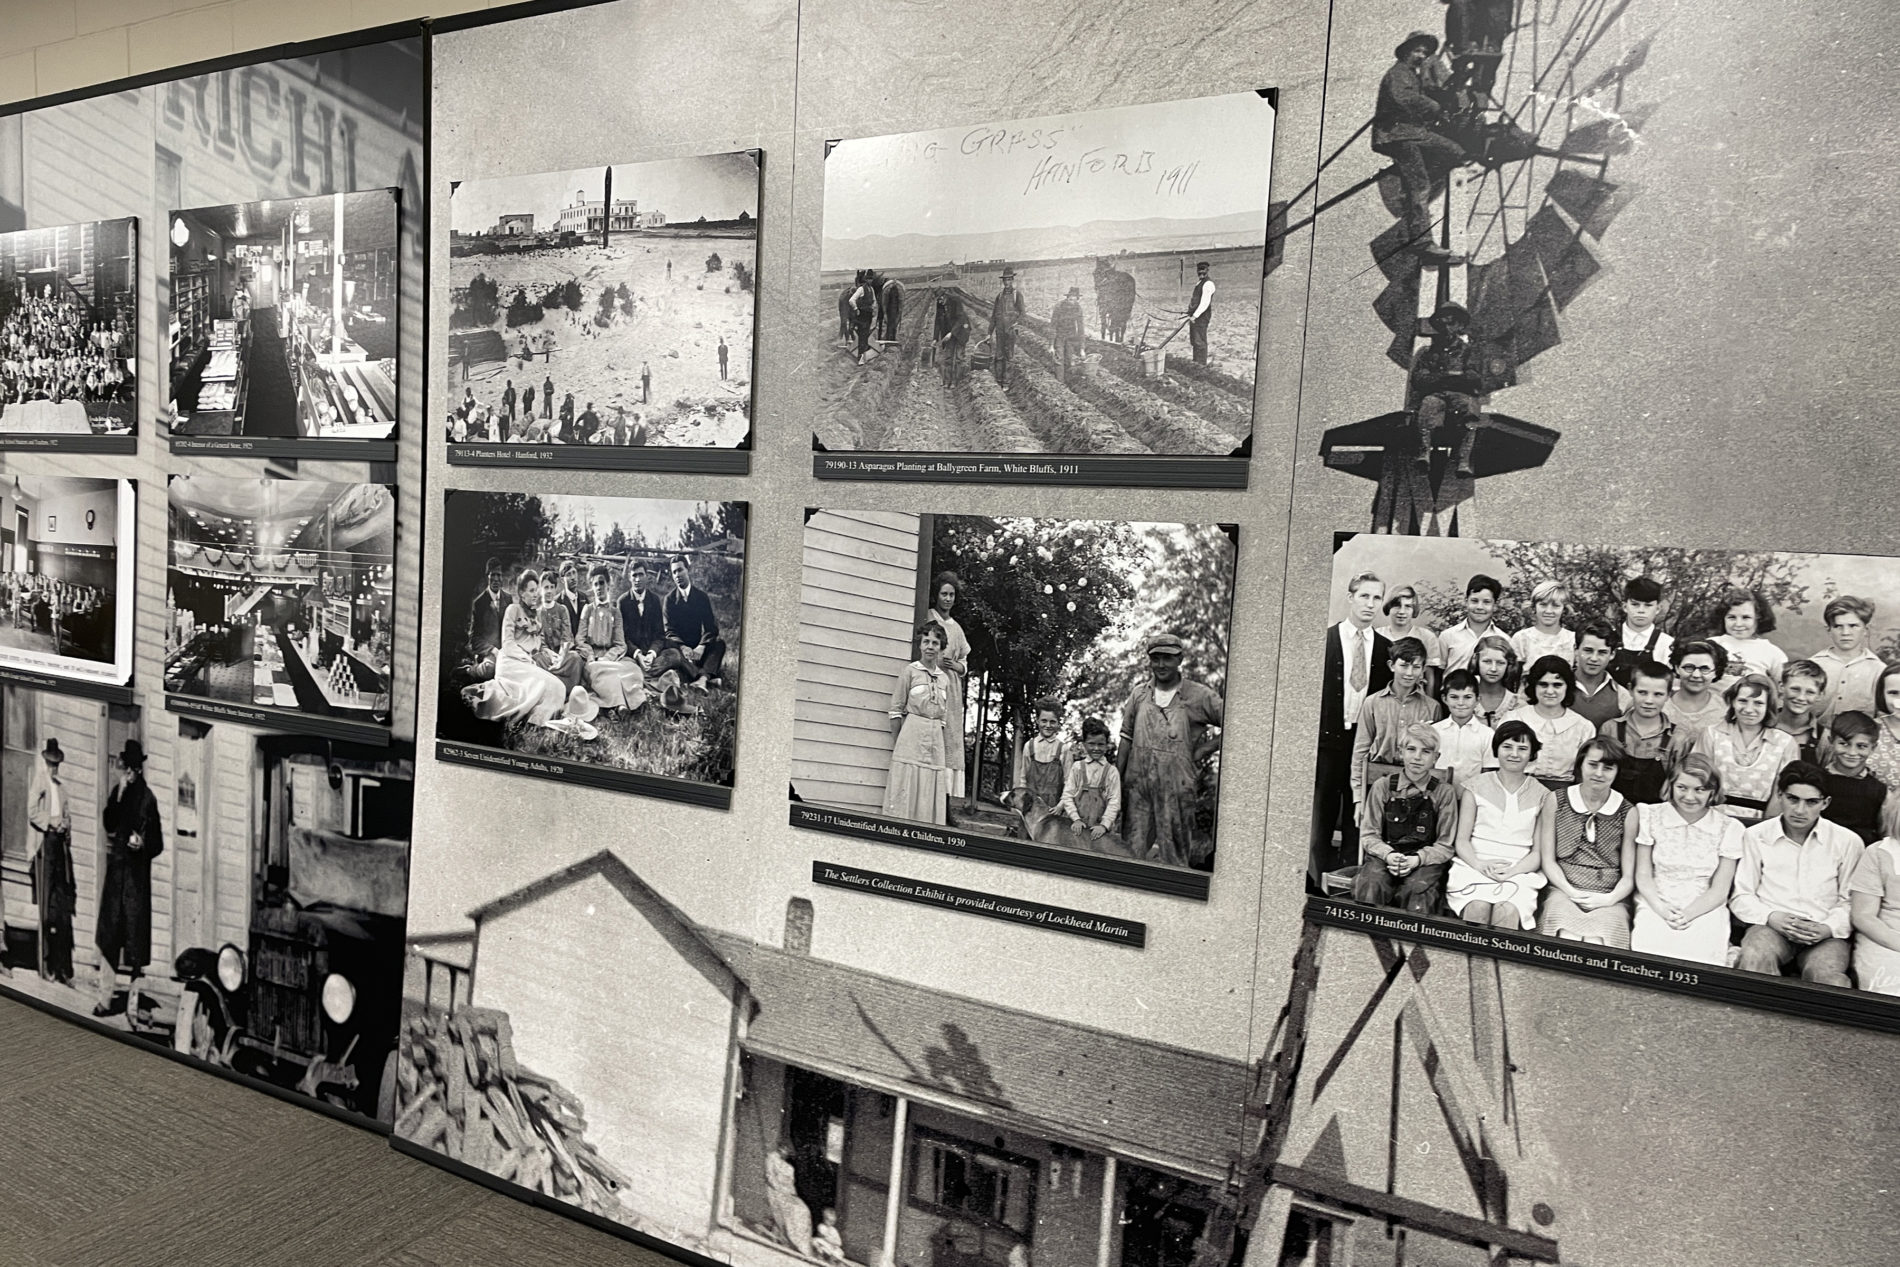 At the Hanford visitor's center, you can see this exhibit of settlers who lived in the Hanford area and were displaced when the Manhattan Project took over the land.